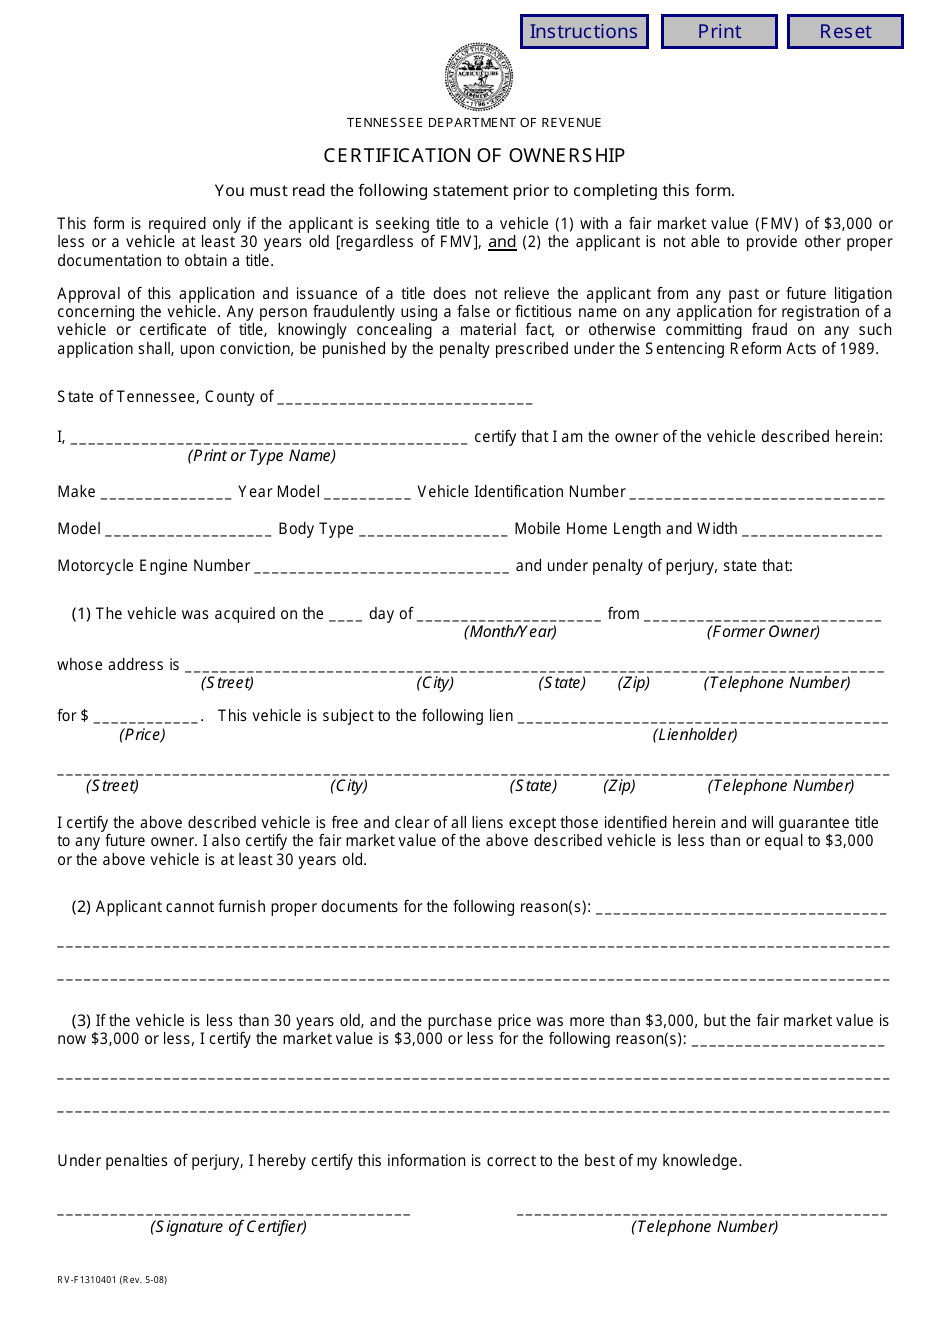 Form RV-F1310401 Certification of Ownership - Tennessee, Page 1